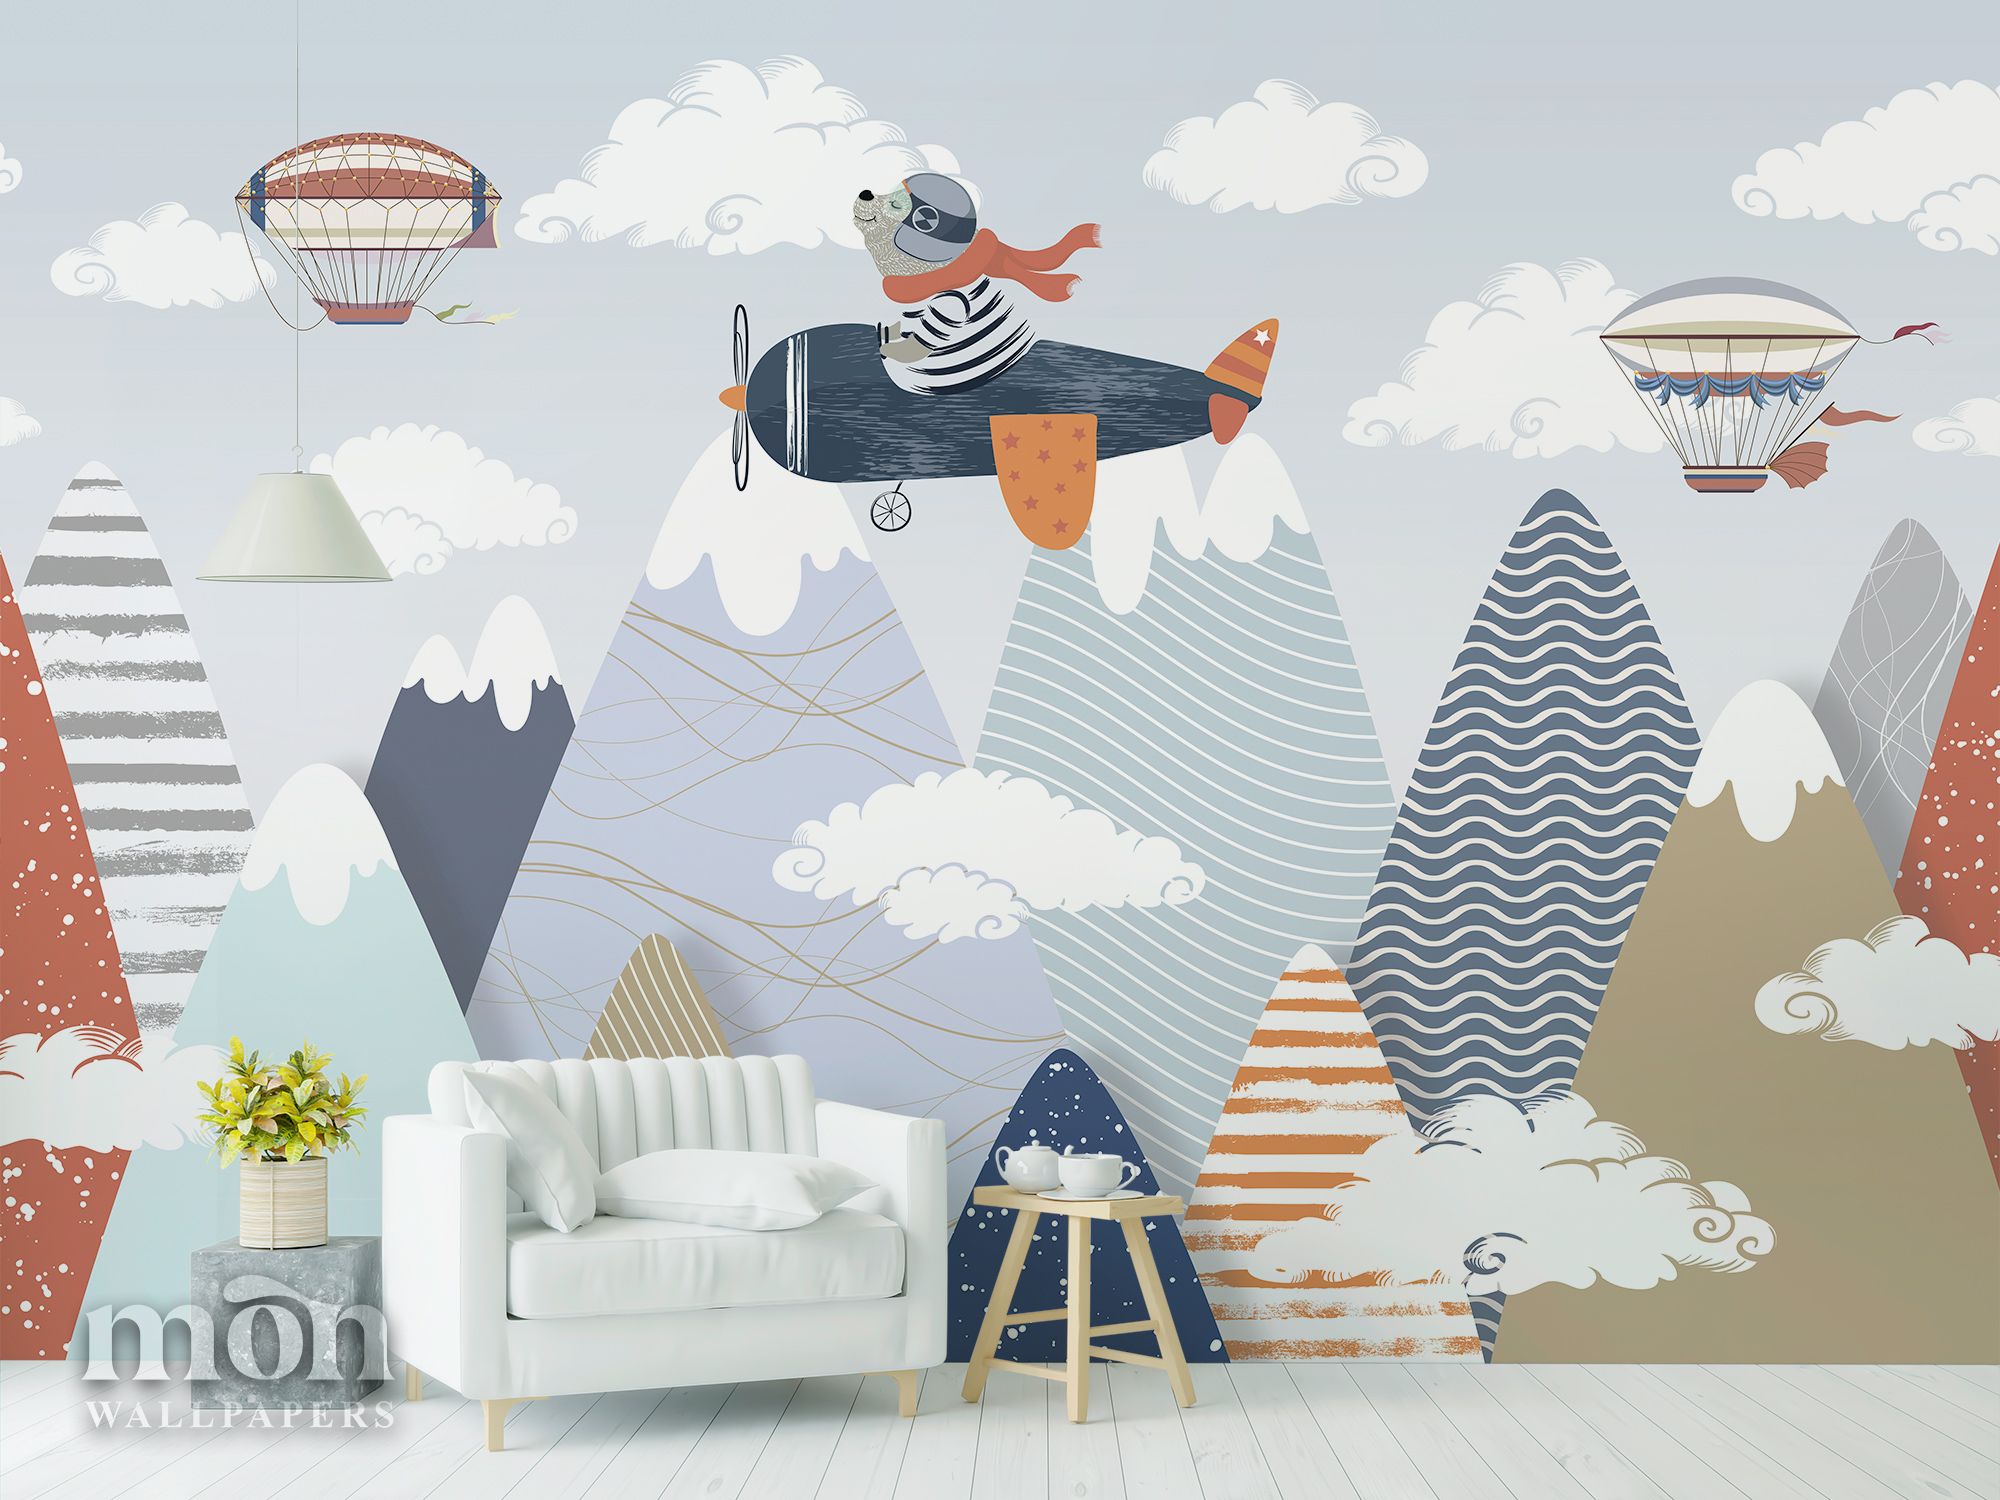 Mountains with a Bear on a Plane Nursery Wallpaper, Hot Balloons and Sky  with Clouds Kids Room Children Wall Mural – Mon Wallpapers